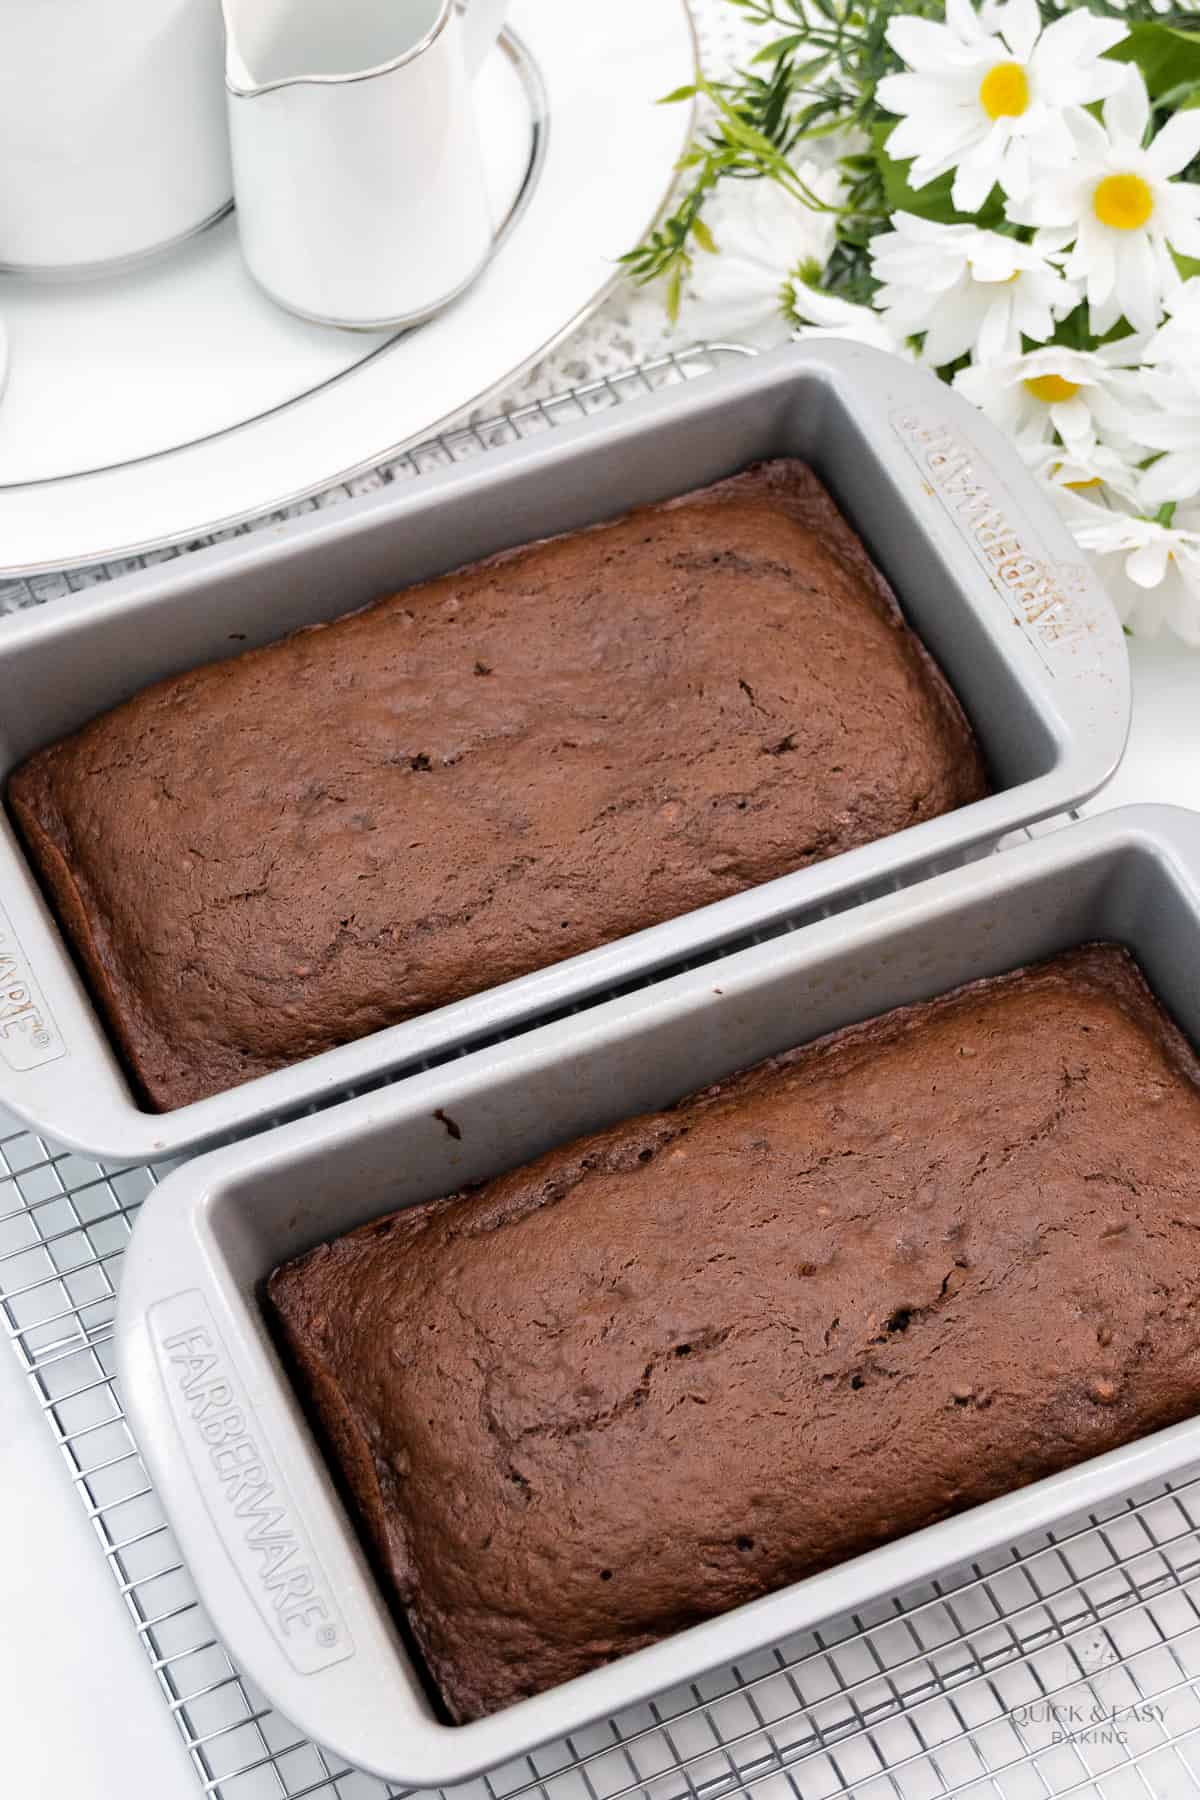 Baked chocolate banana bread in two loaf pans.